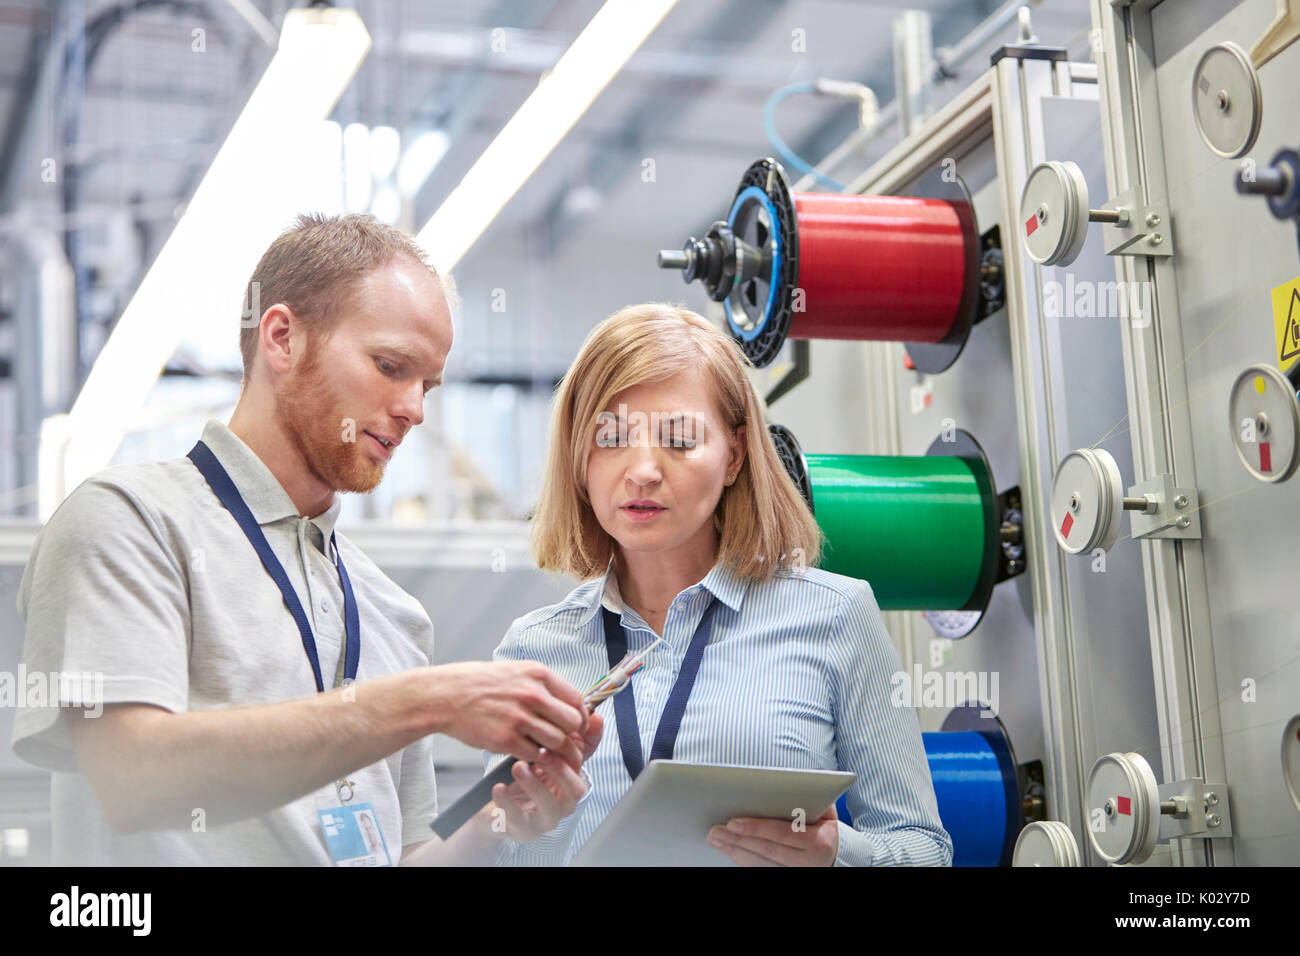 Male and female workers with digital tablet examining part in fiber optics factory Stock Photo